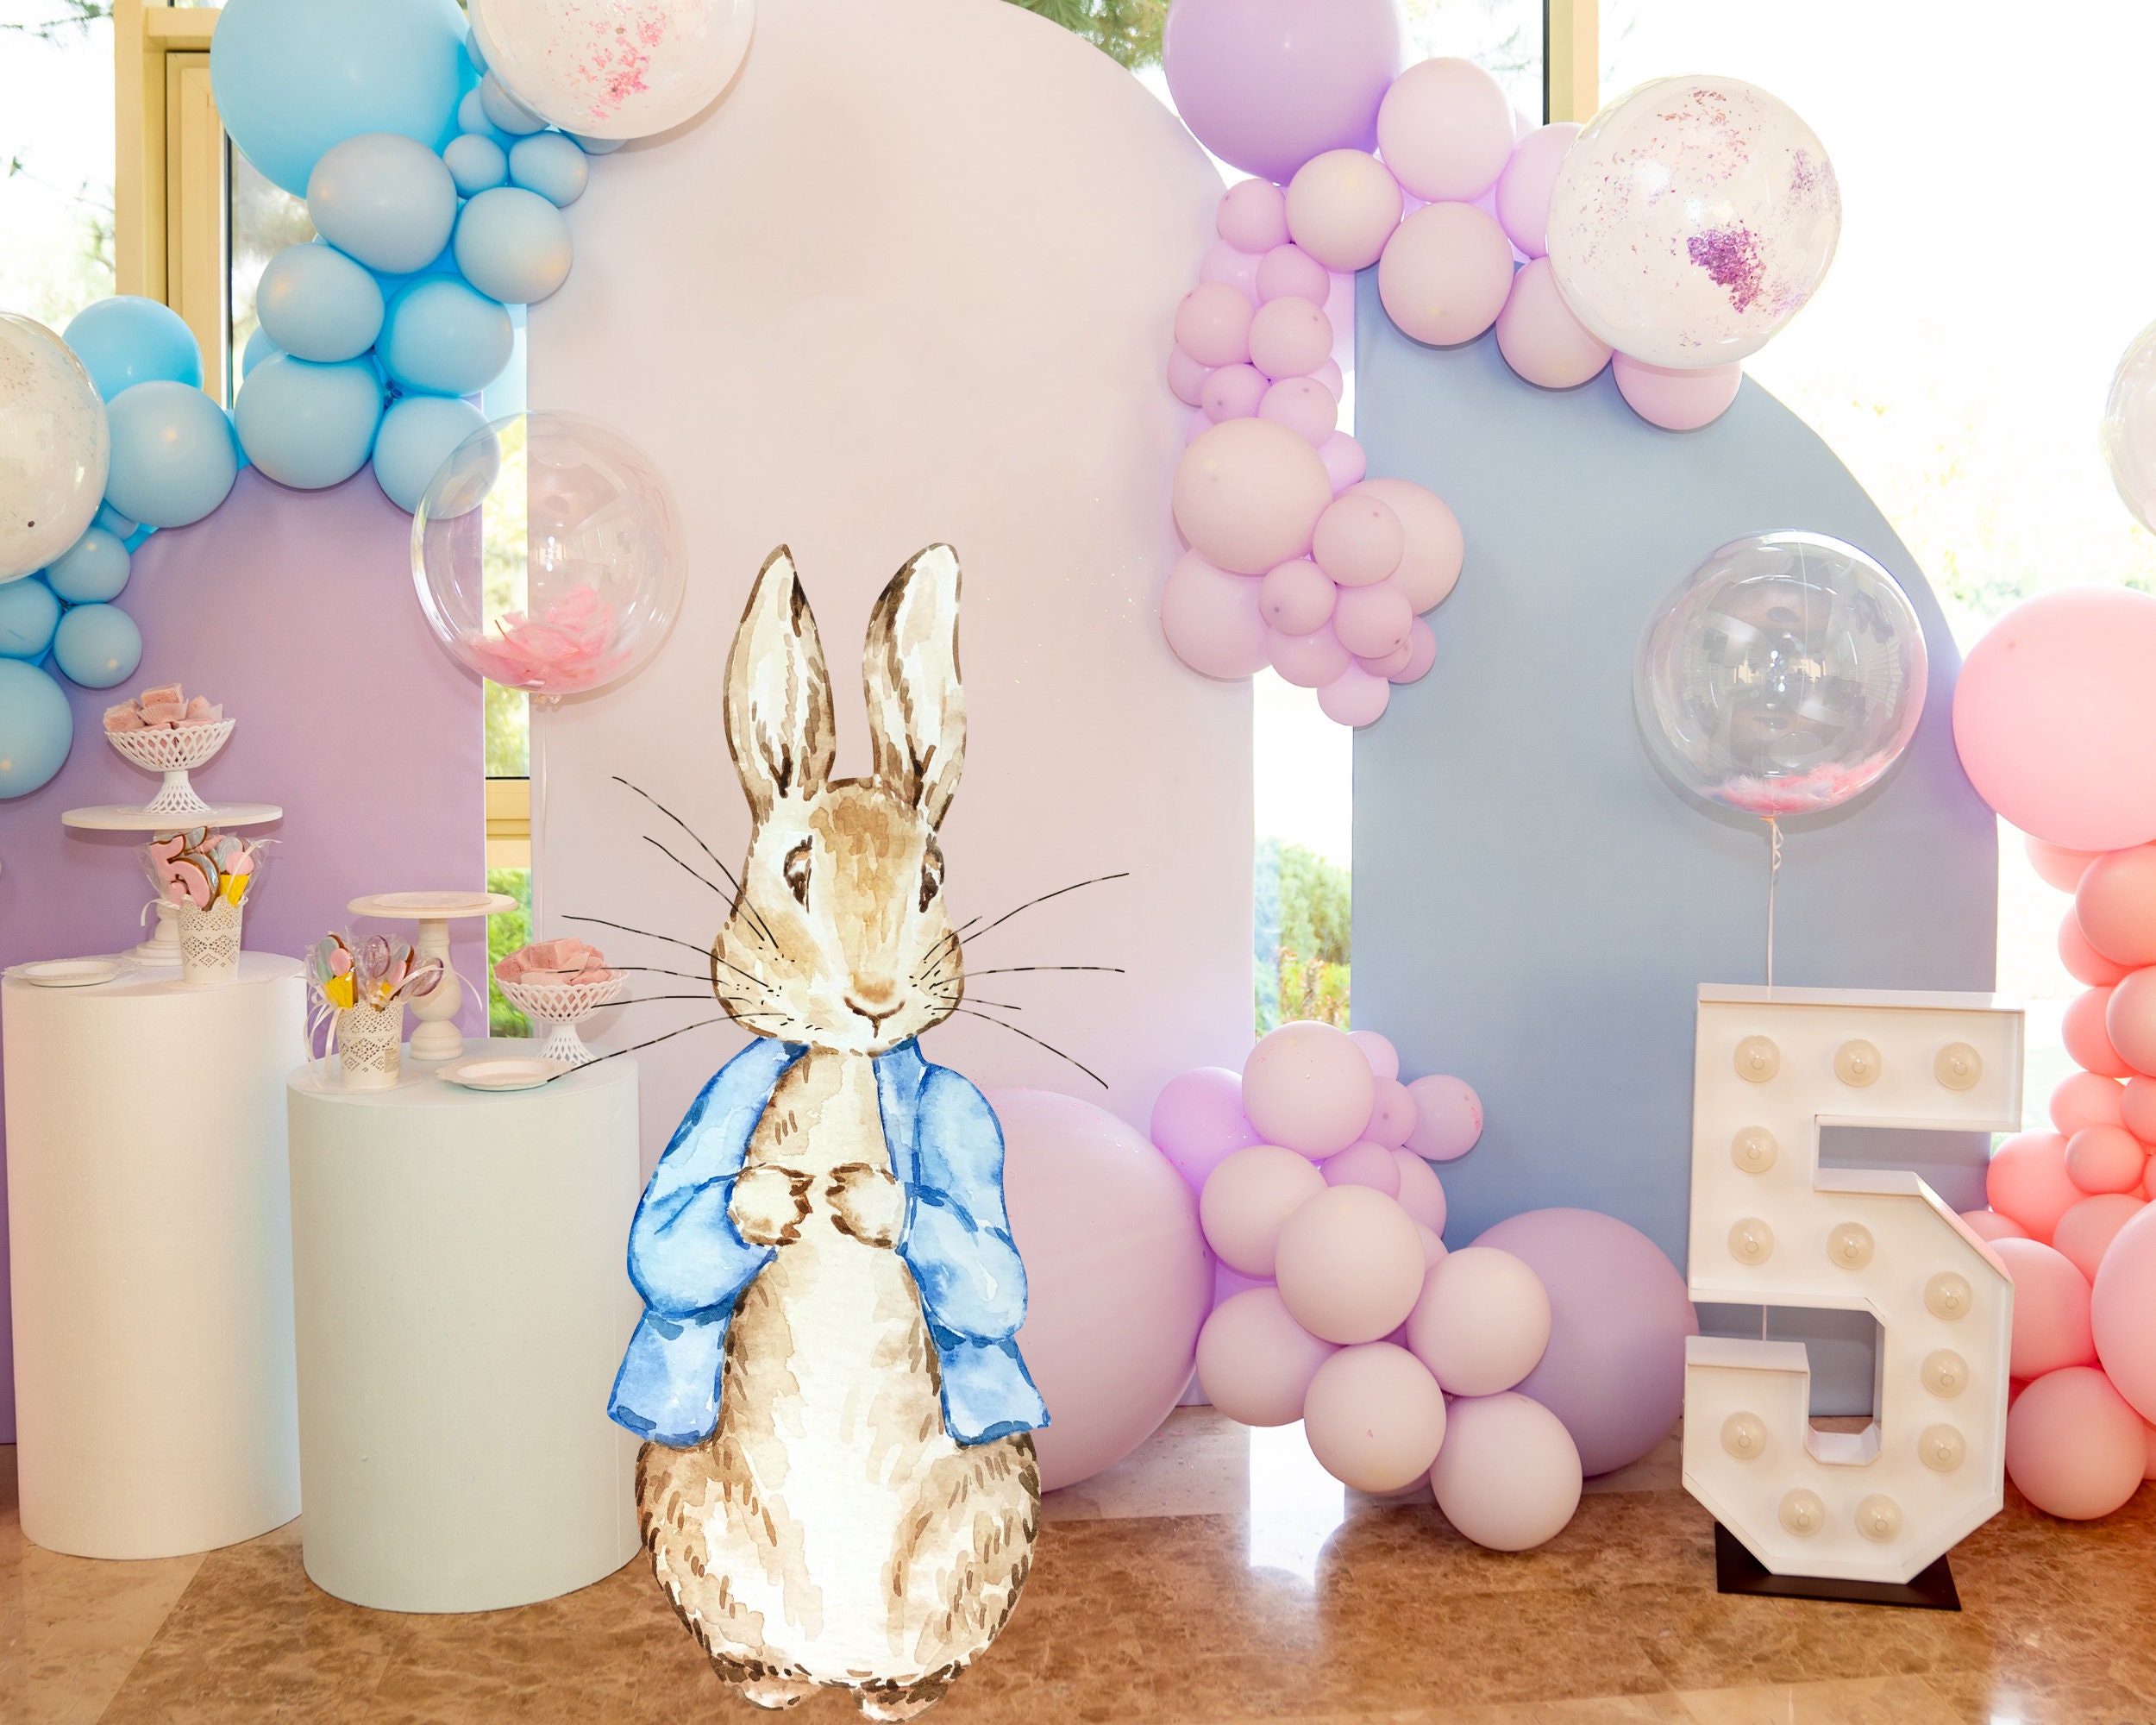 Classic Peter Rabbit Storybook Backdrop - 5x7 Feet from Ellies